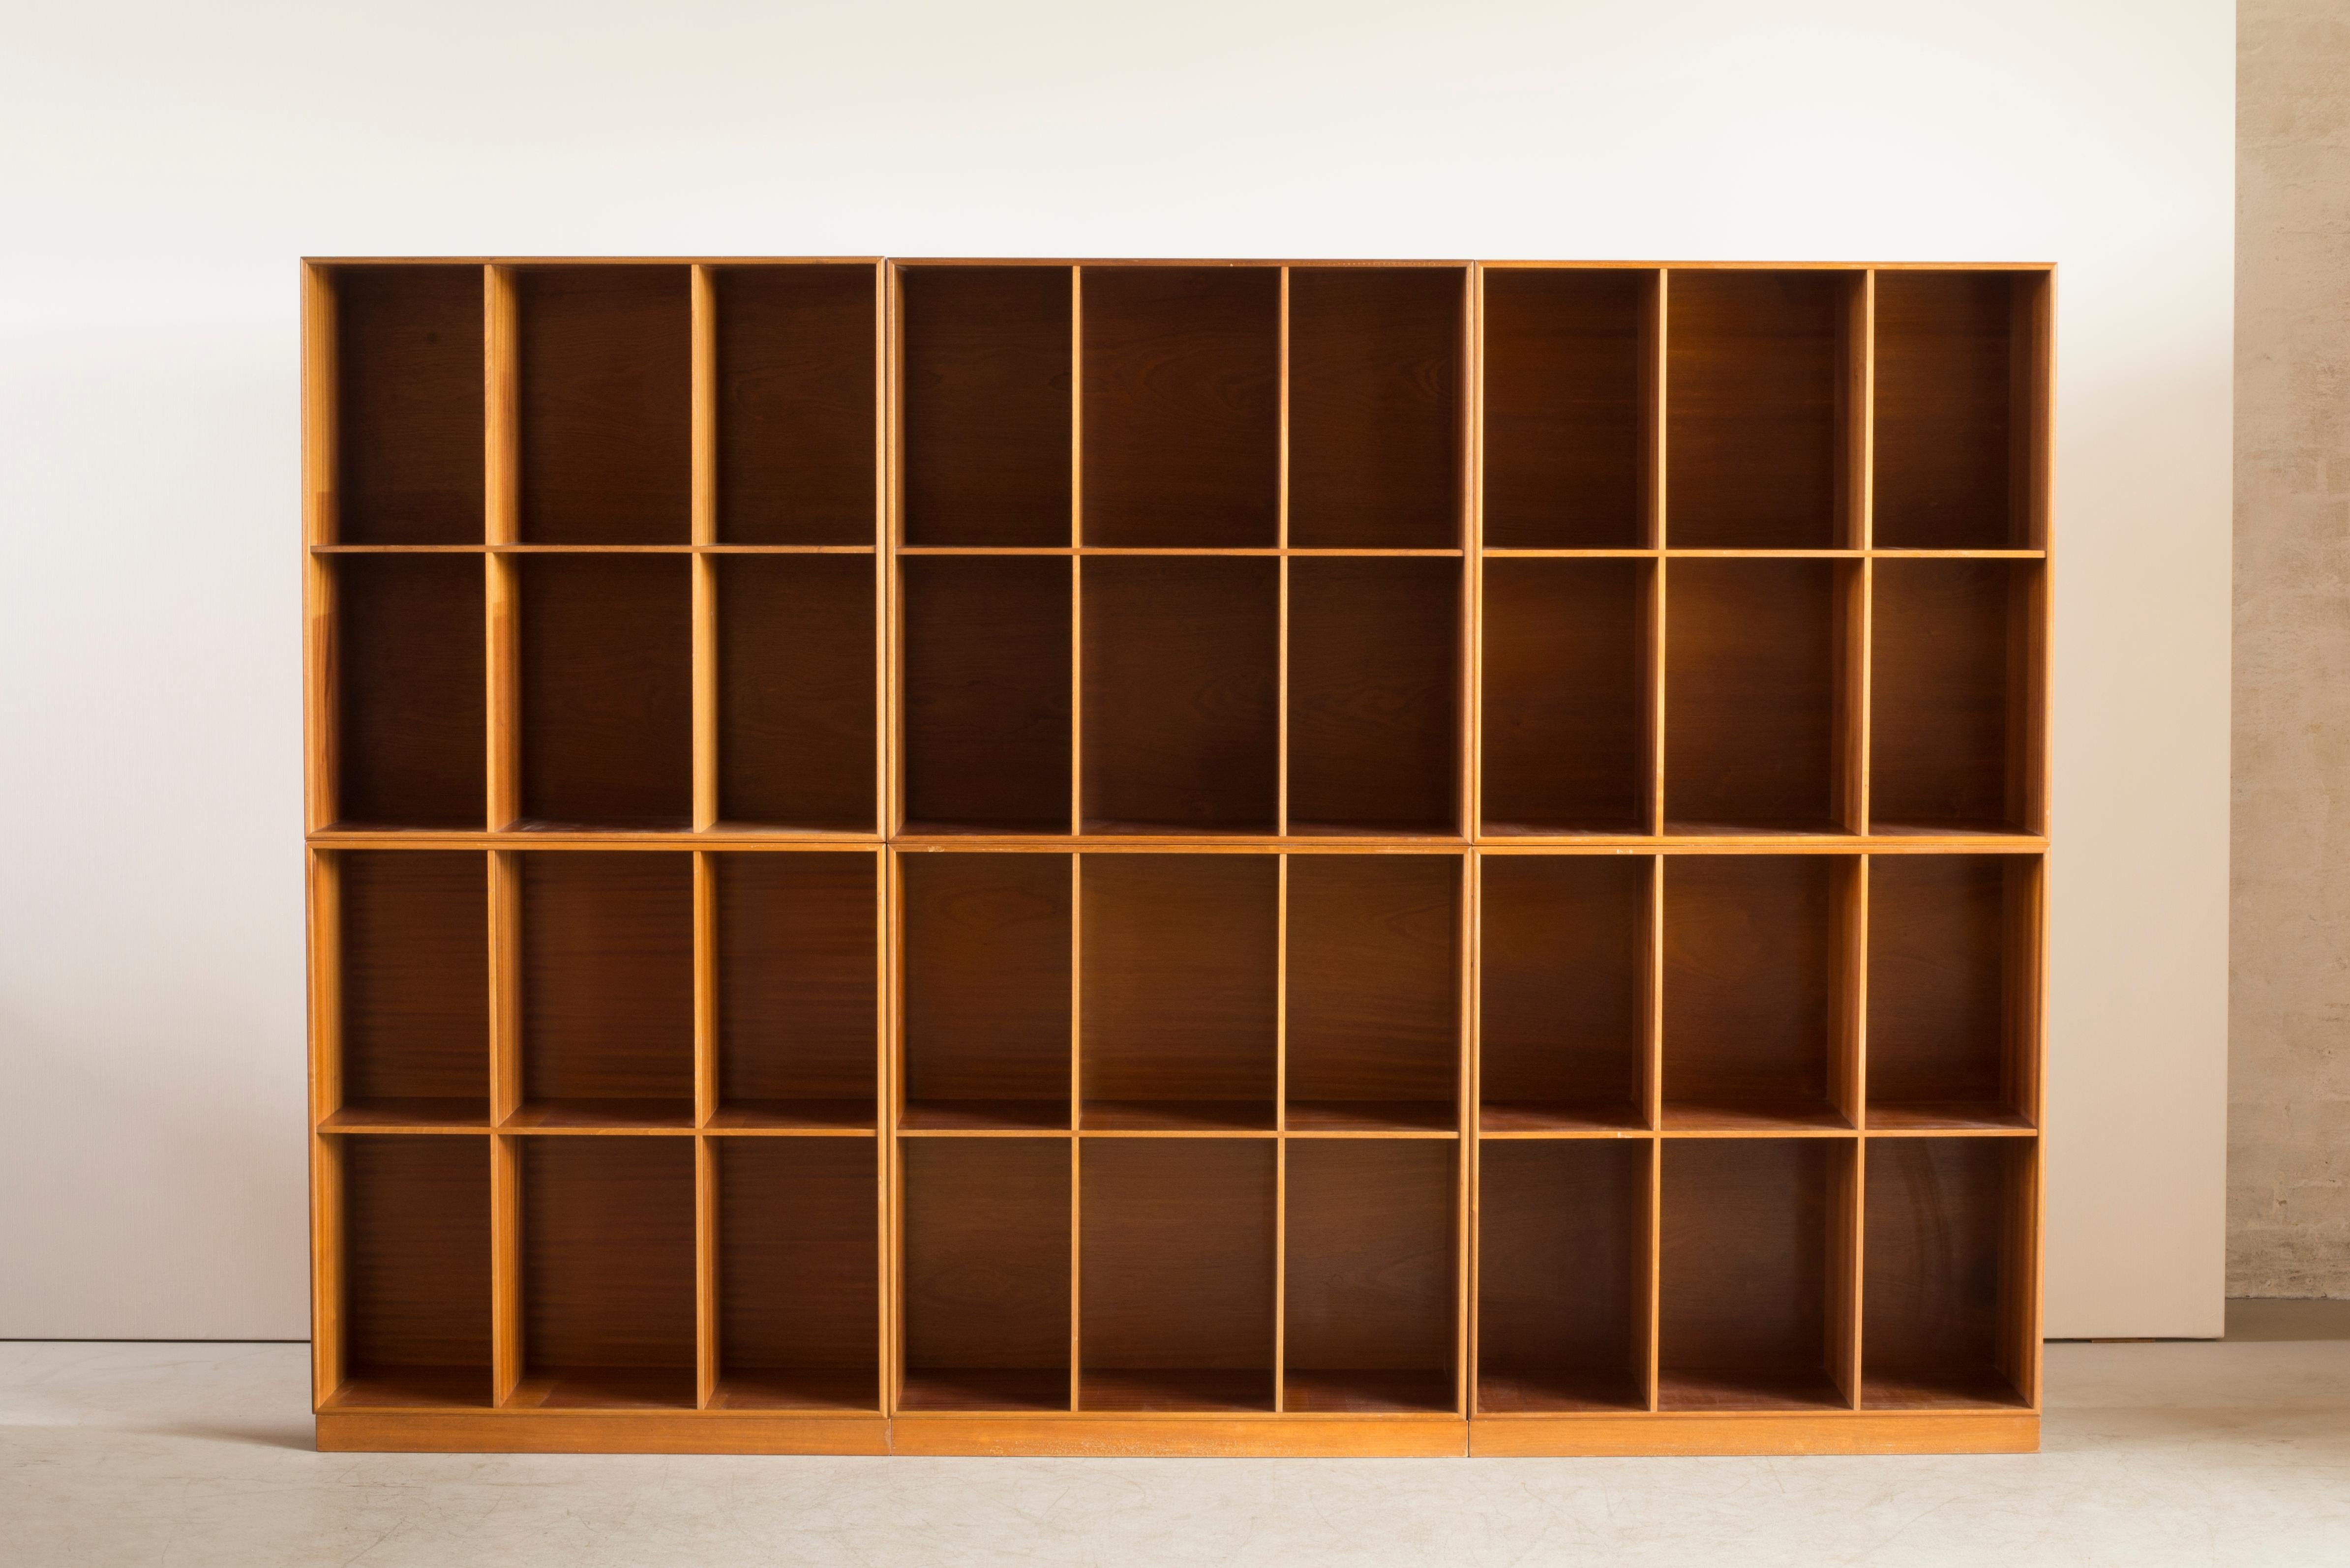 Lacquered Mogens Koch Bookcases of Mahogany for Rud. Rasmussen